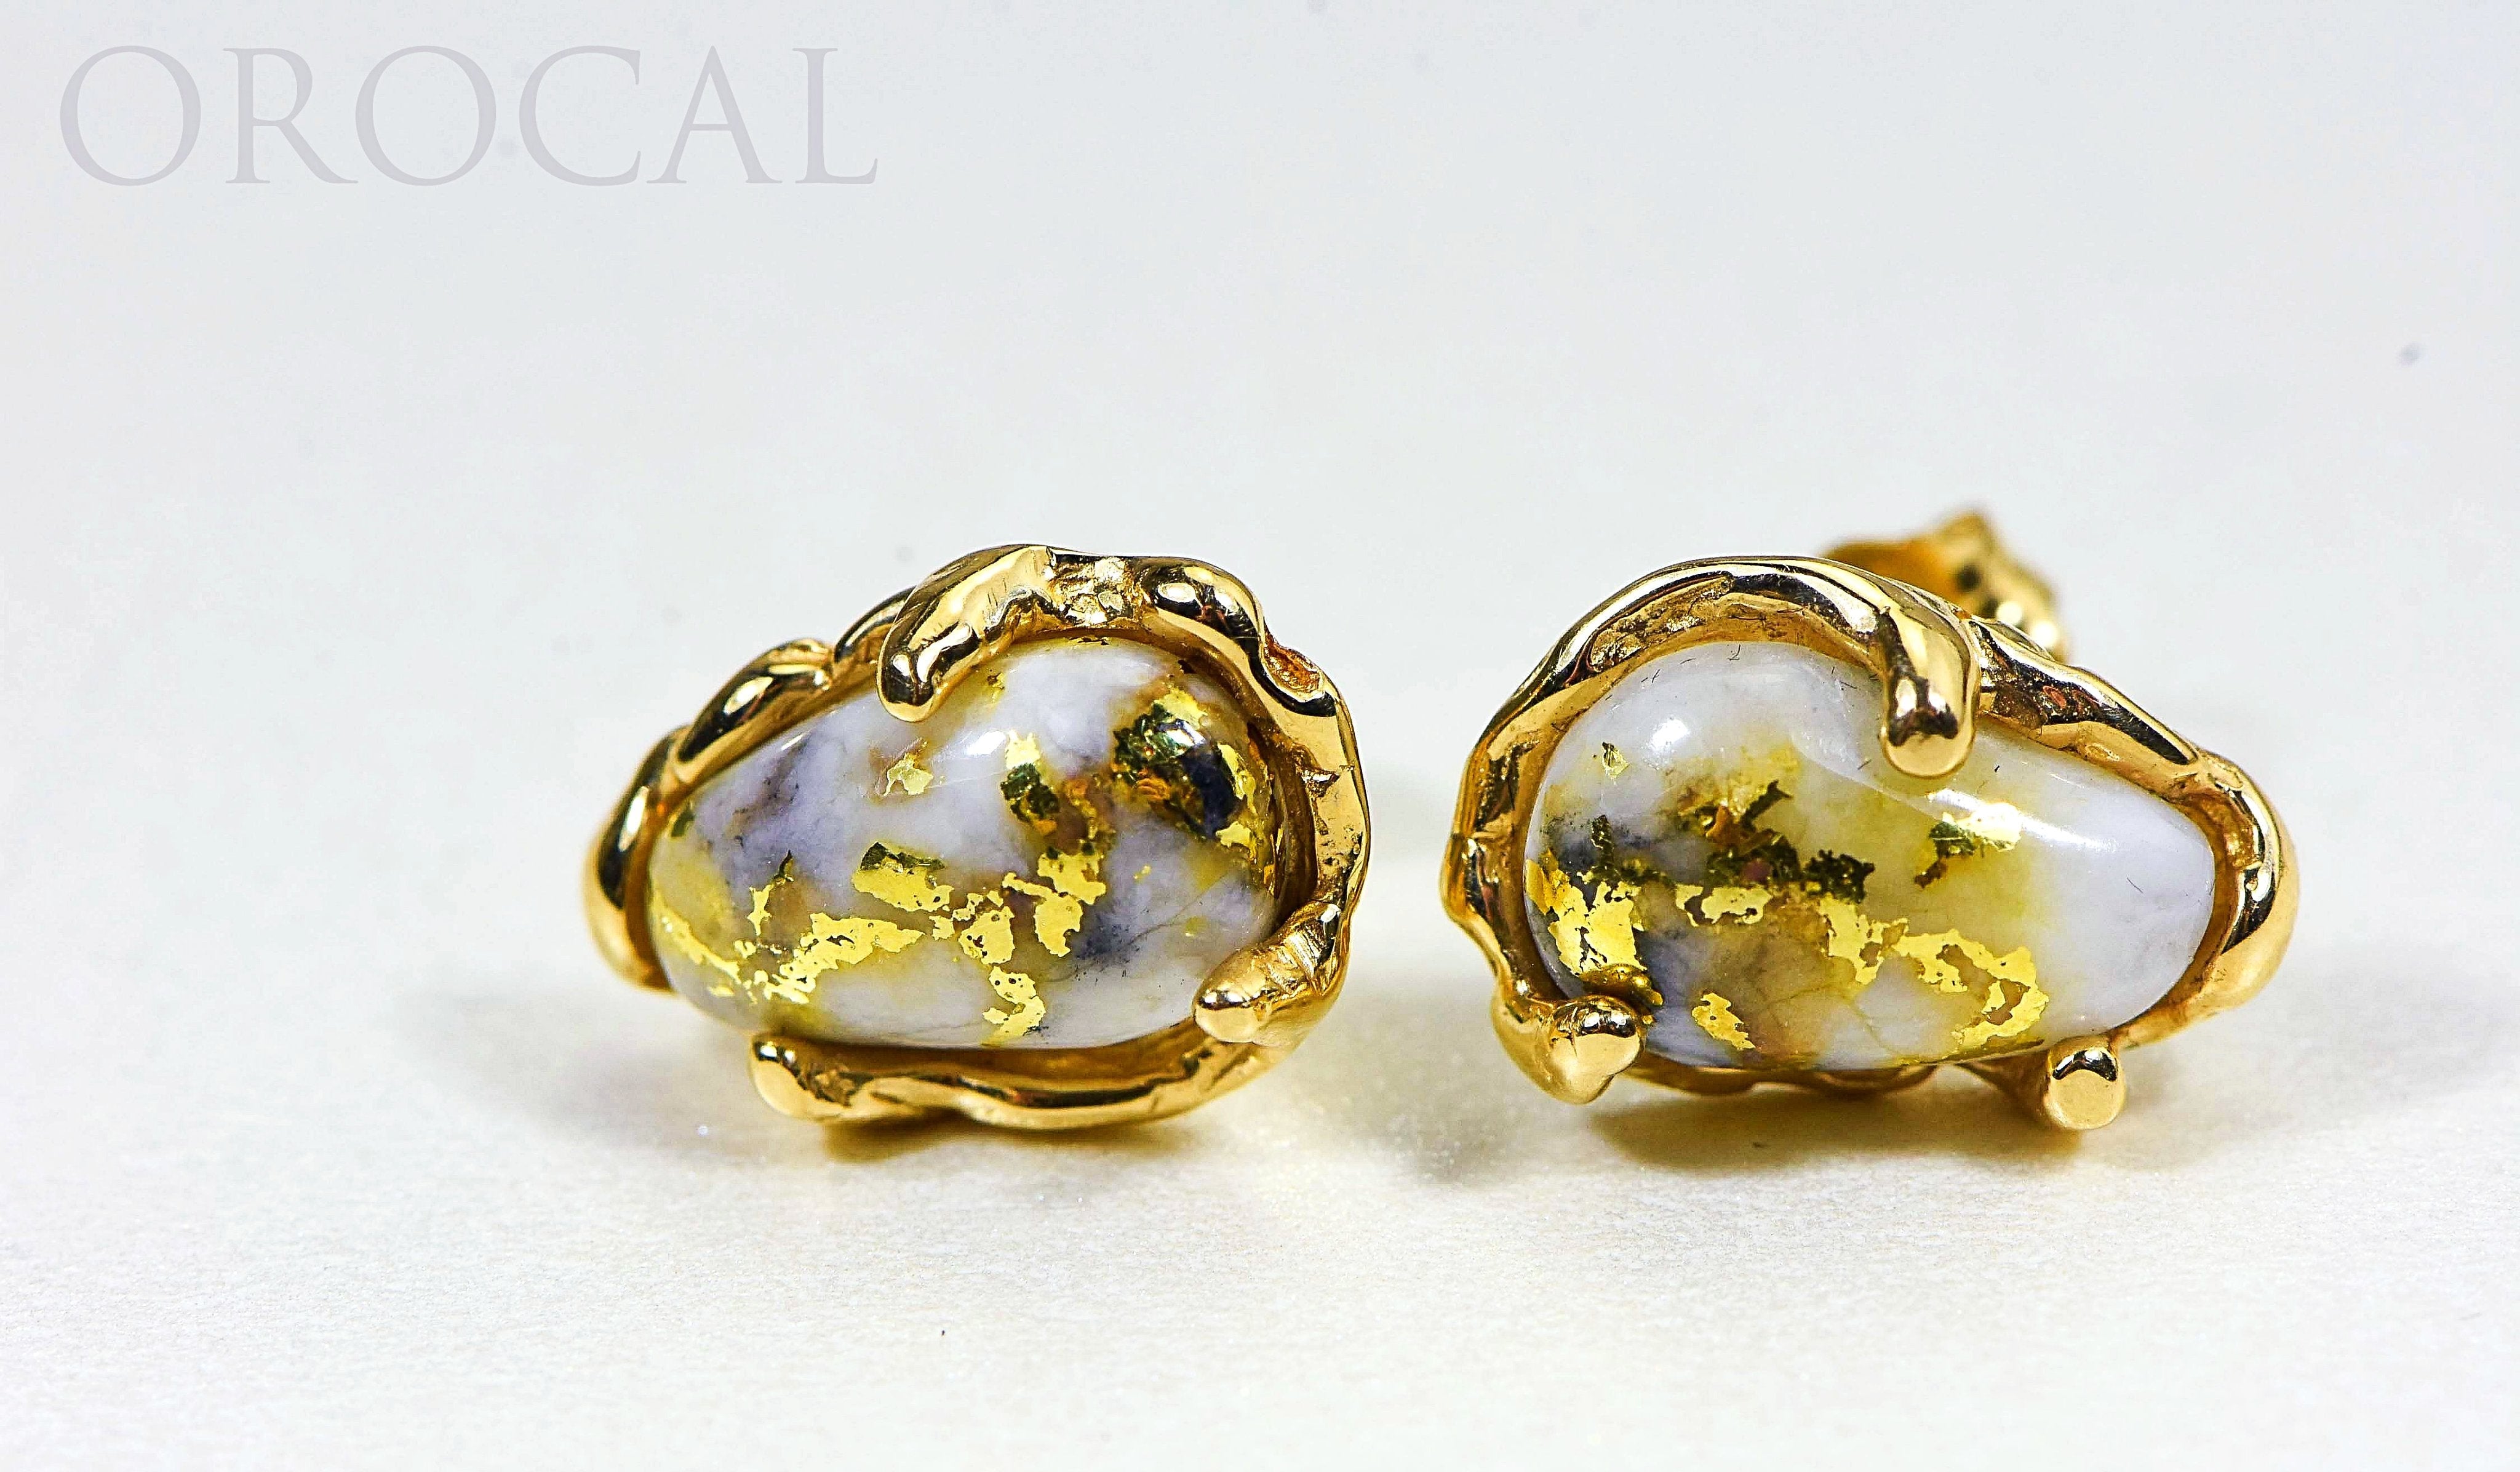 Gold Quartz Earrings "Orocal" EFFQ4 Genuine Hand Crafted Jewelry - 14K Gold Casting